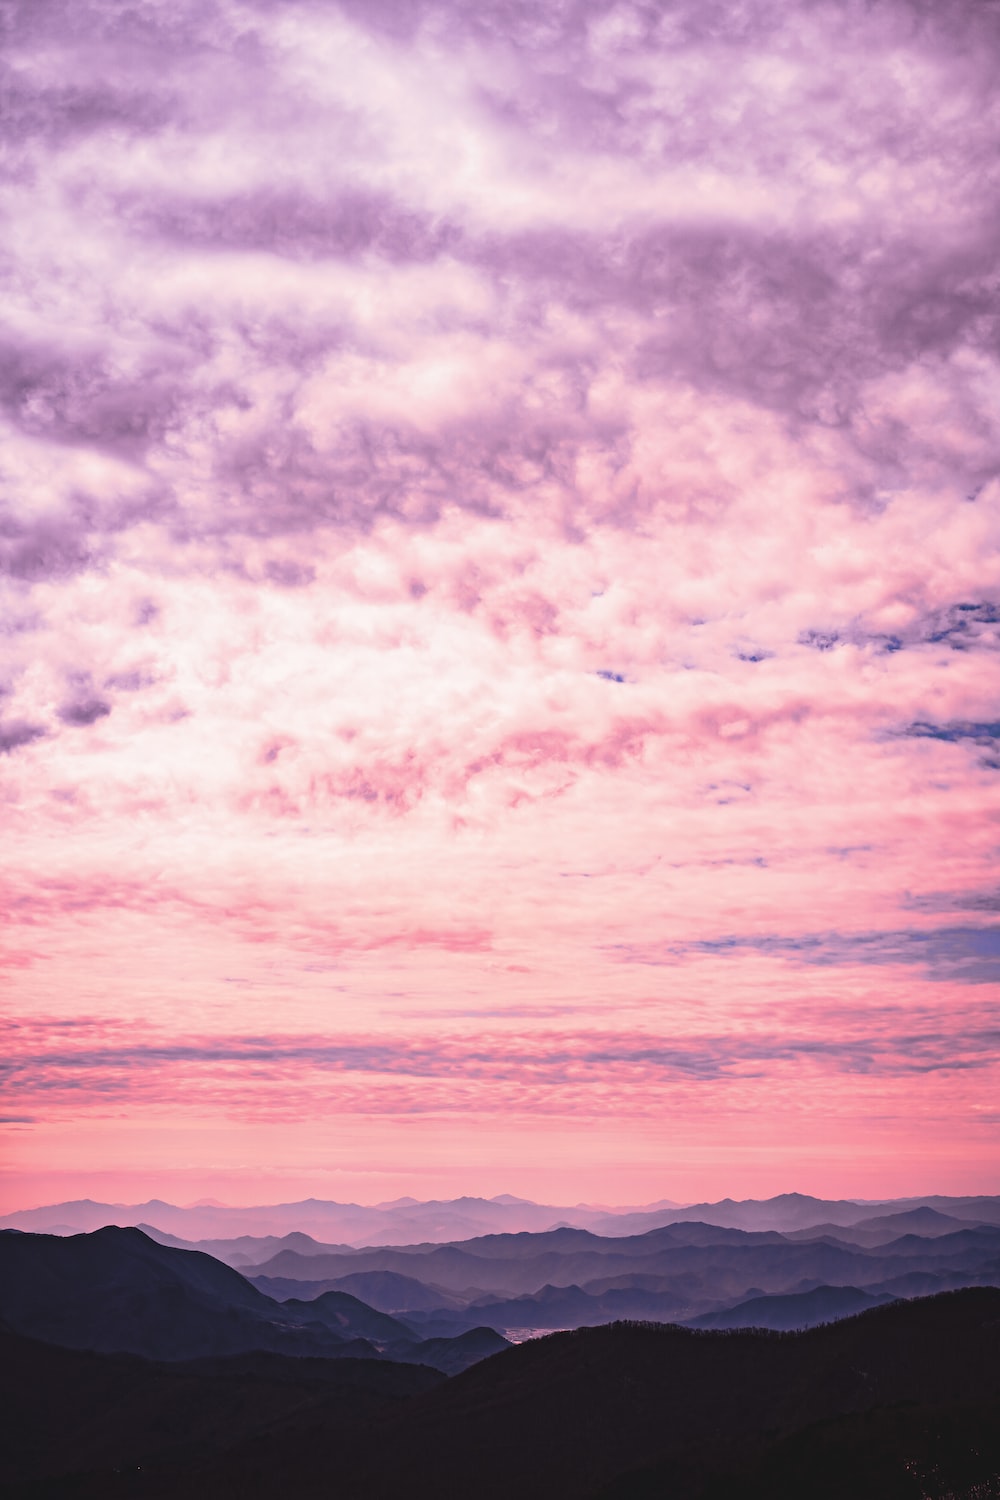 Pink Sunrise Picture. Download Free Image